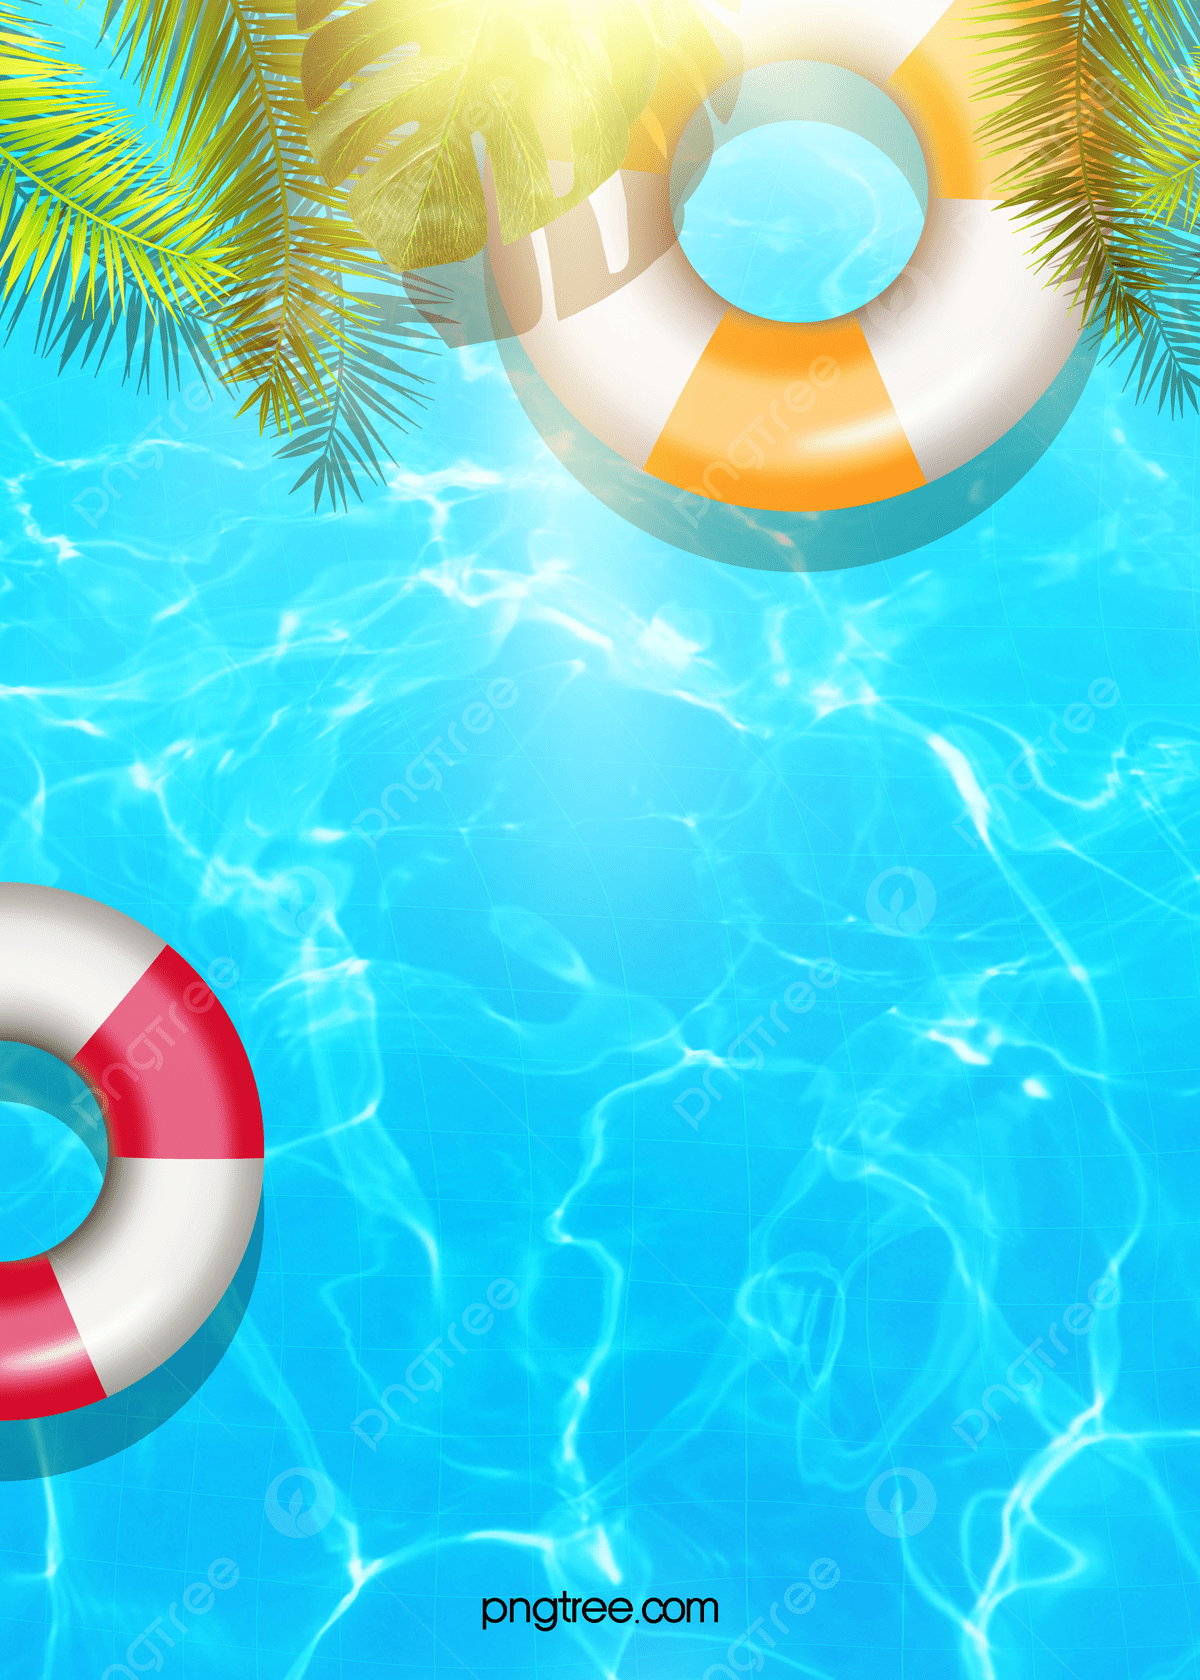 Summer Creative Hand Painted Swimming Pool Background Wallpaper Image For Free Download